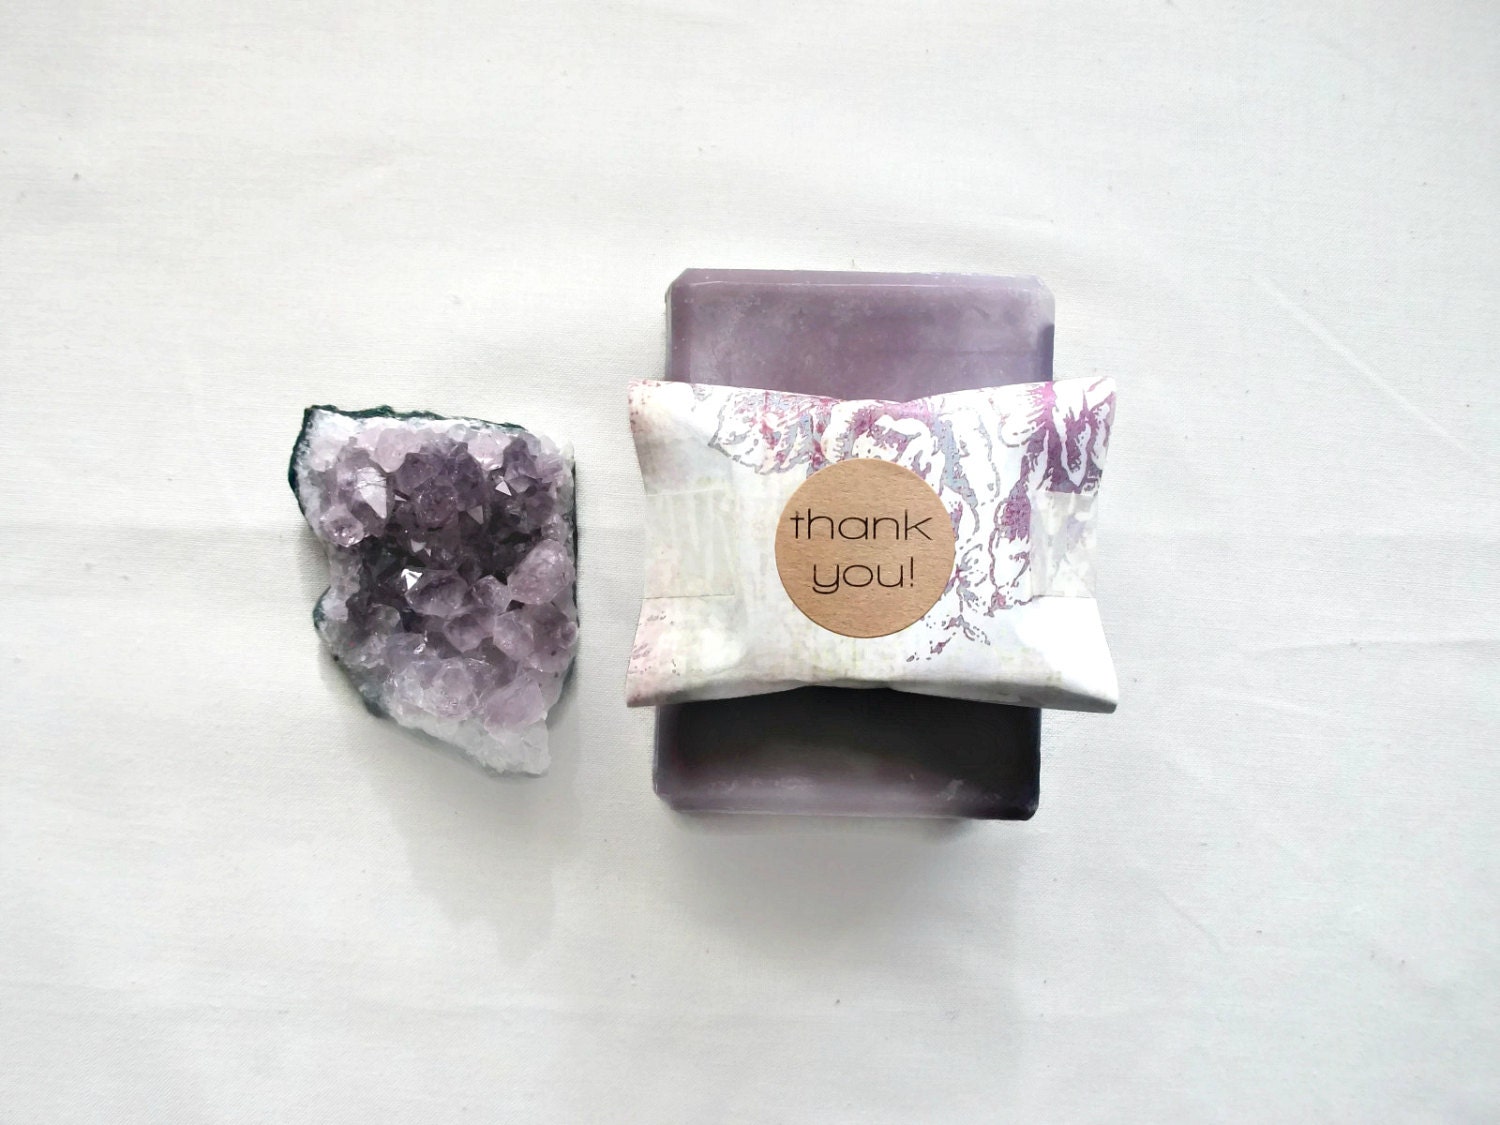 Lavender Lover's Gift Set - Lip Balm and Soap Gift Set herbal, all natural, skincare, romantic, mystic, ethereal, dreamy - WinsomeGreen